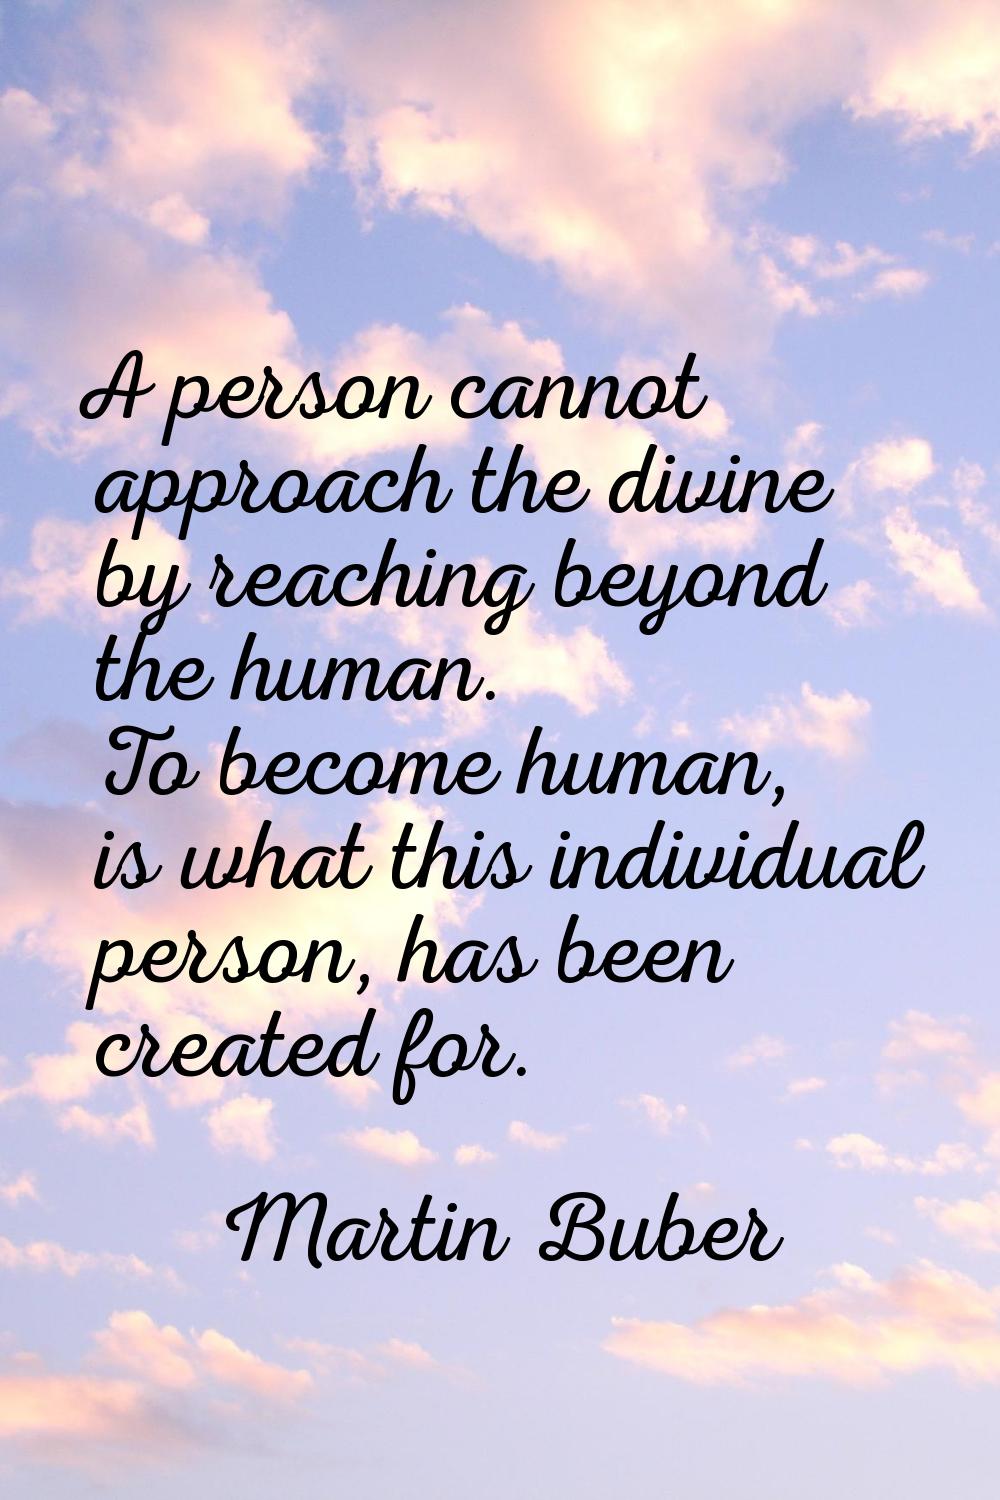 A person cannot approach the divine by reaching beyond the human. To become human, is what this ind